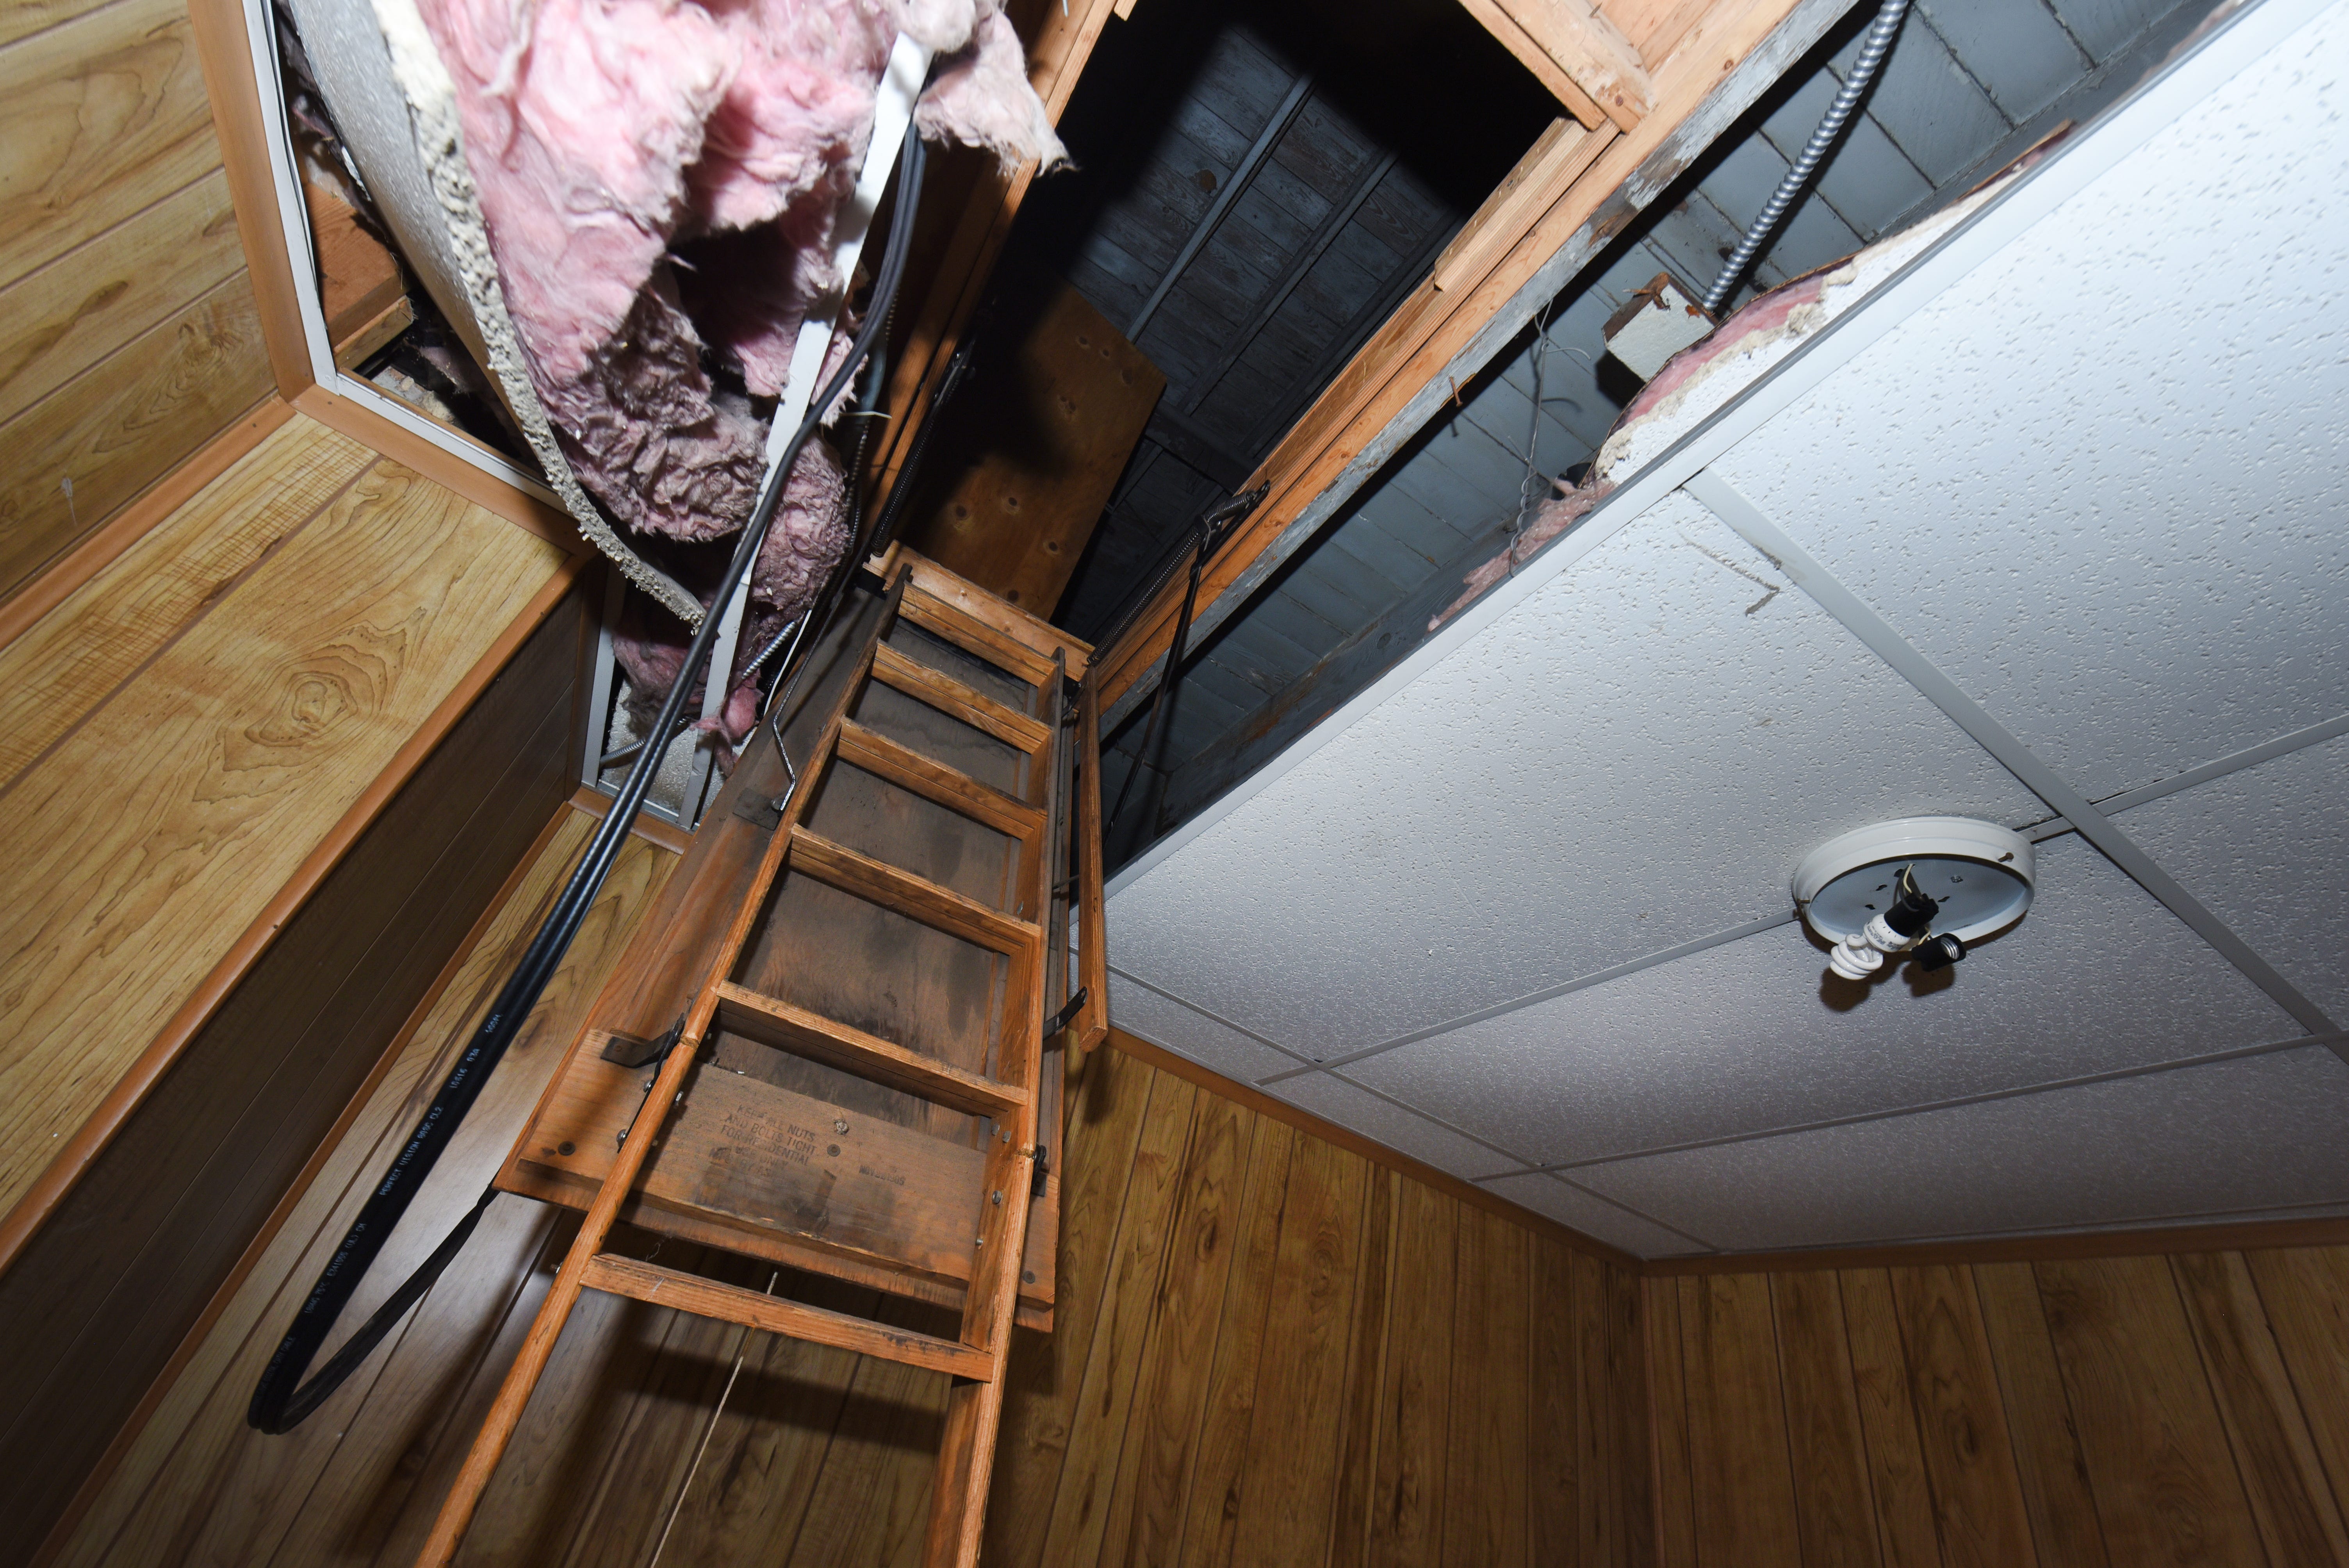 The ceiling compartment where the remains of 11 infants were found hidden inside the former Cantrell Funeral Home.